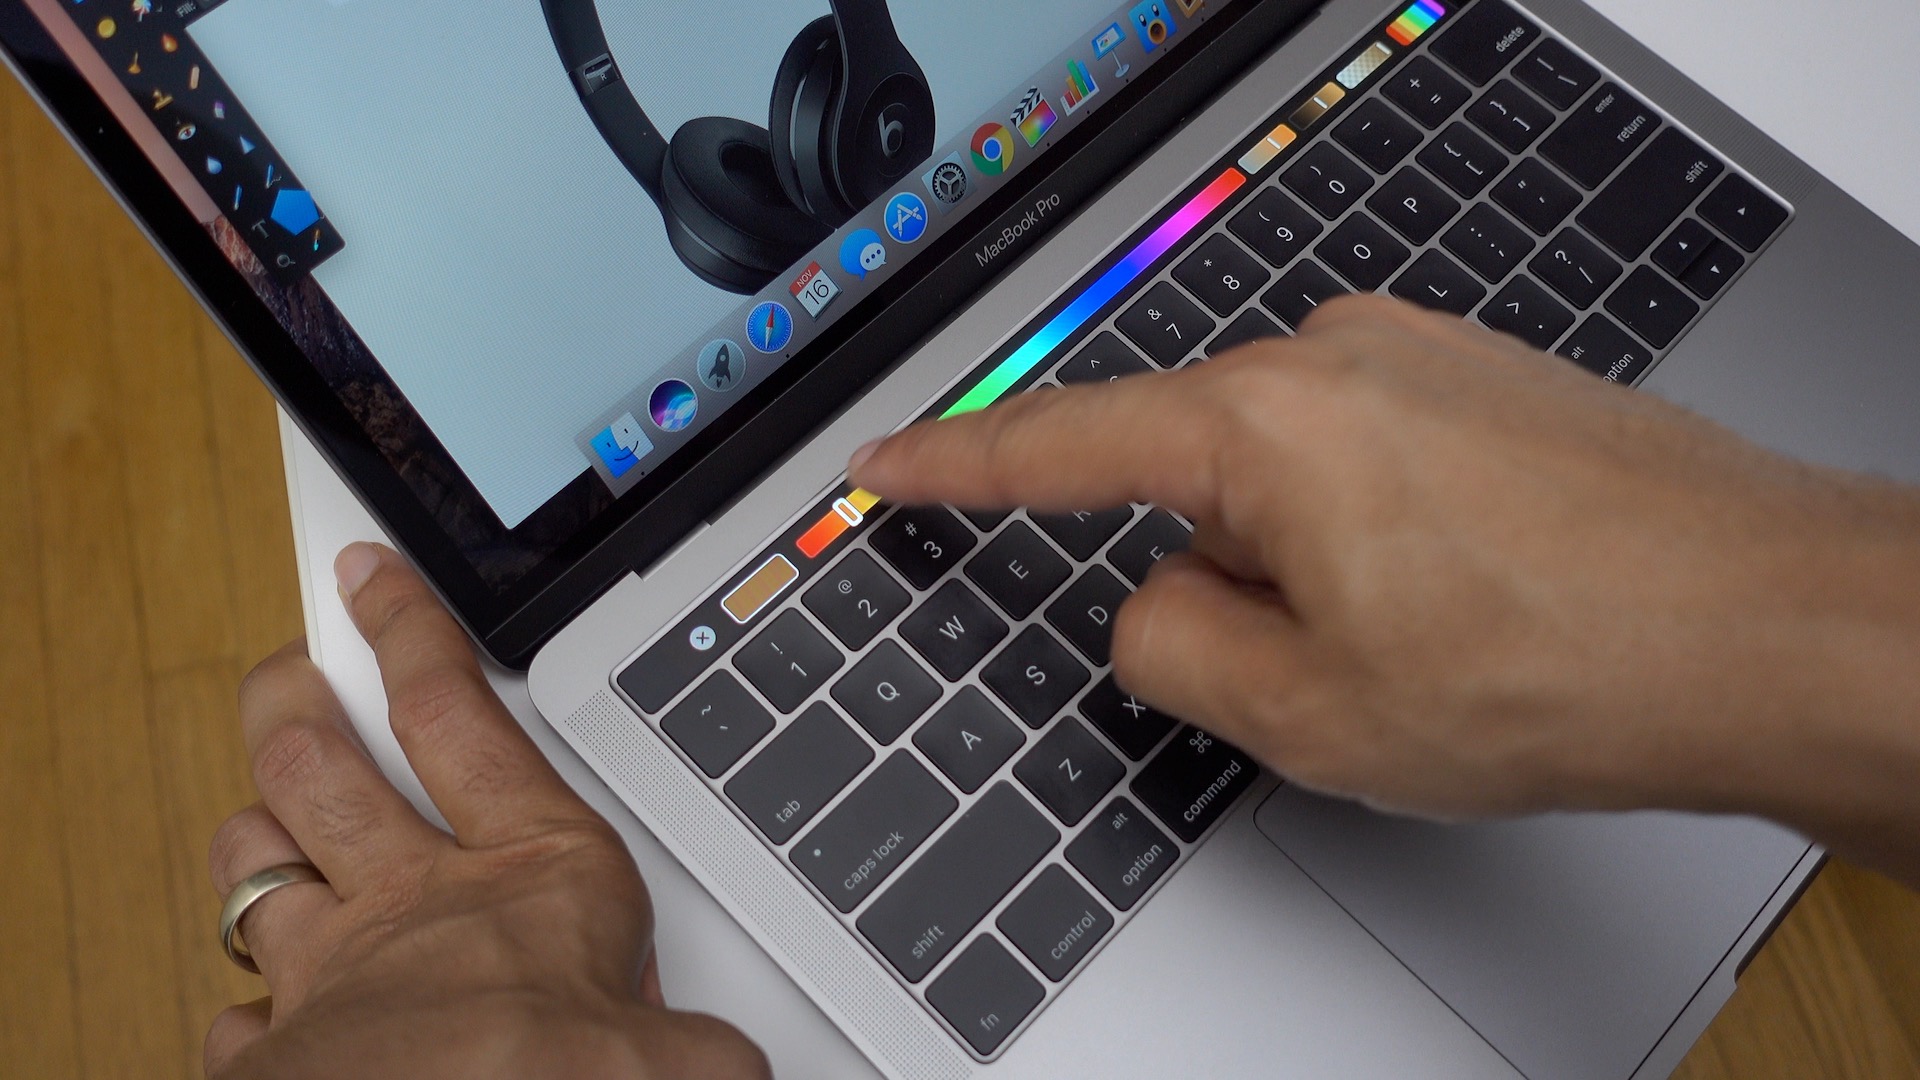 Hands-on impressions: 13-inch MacBook Pro with Touch Bar [Video